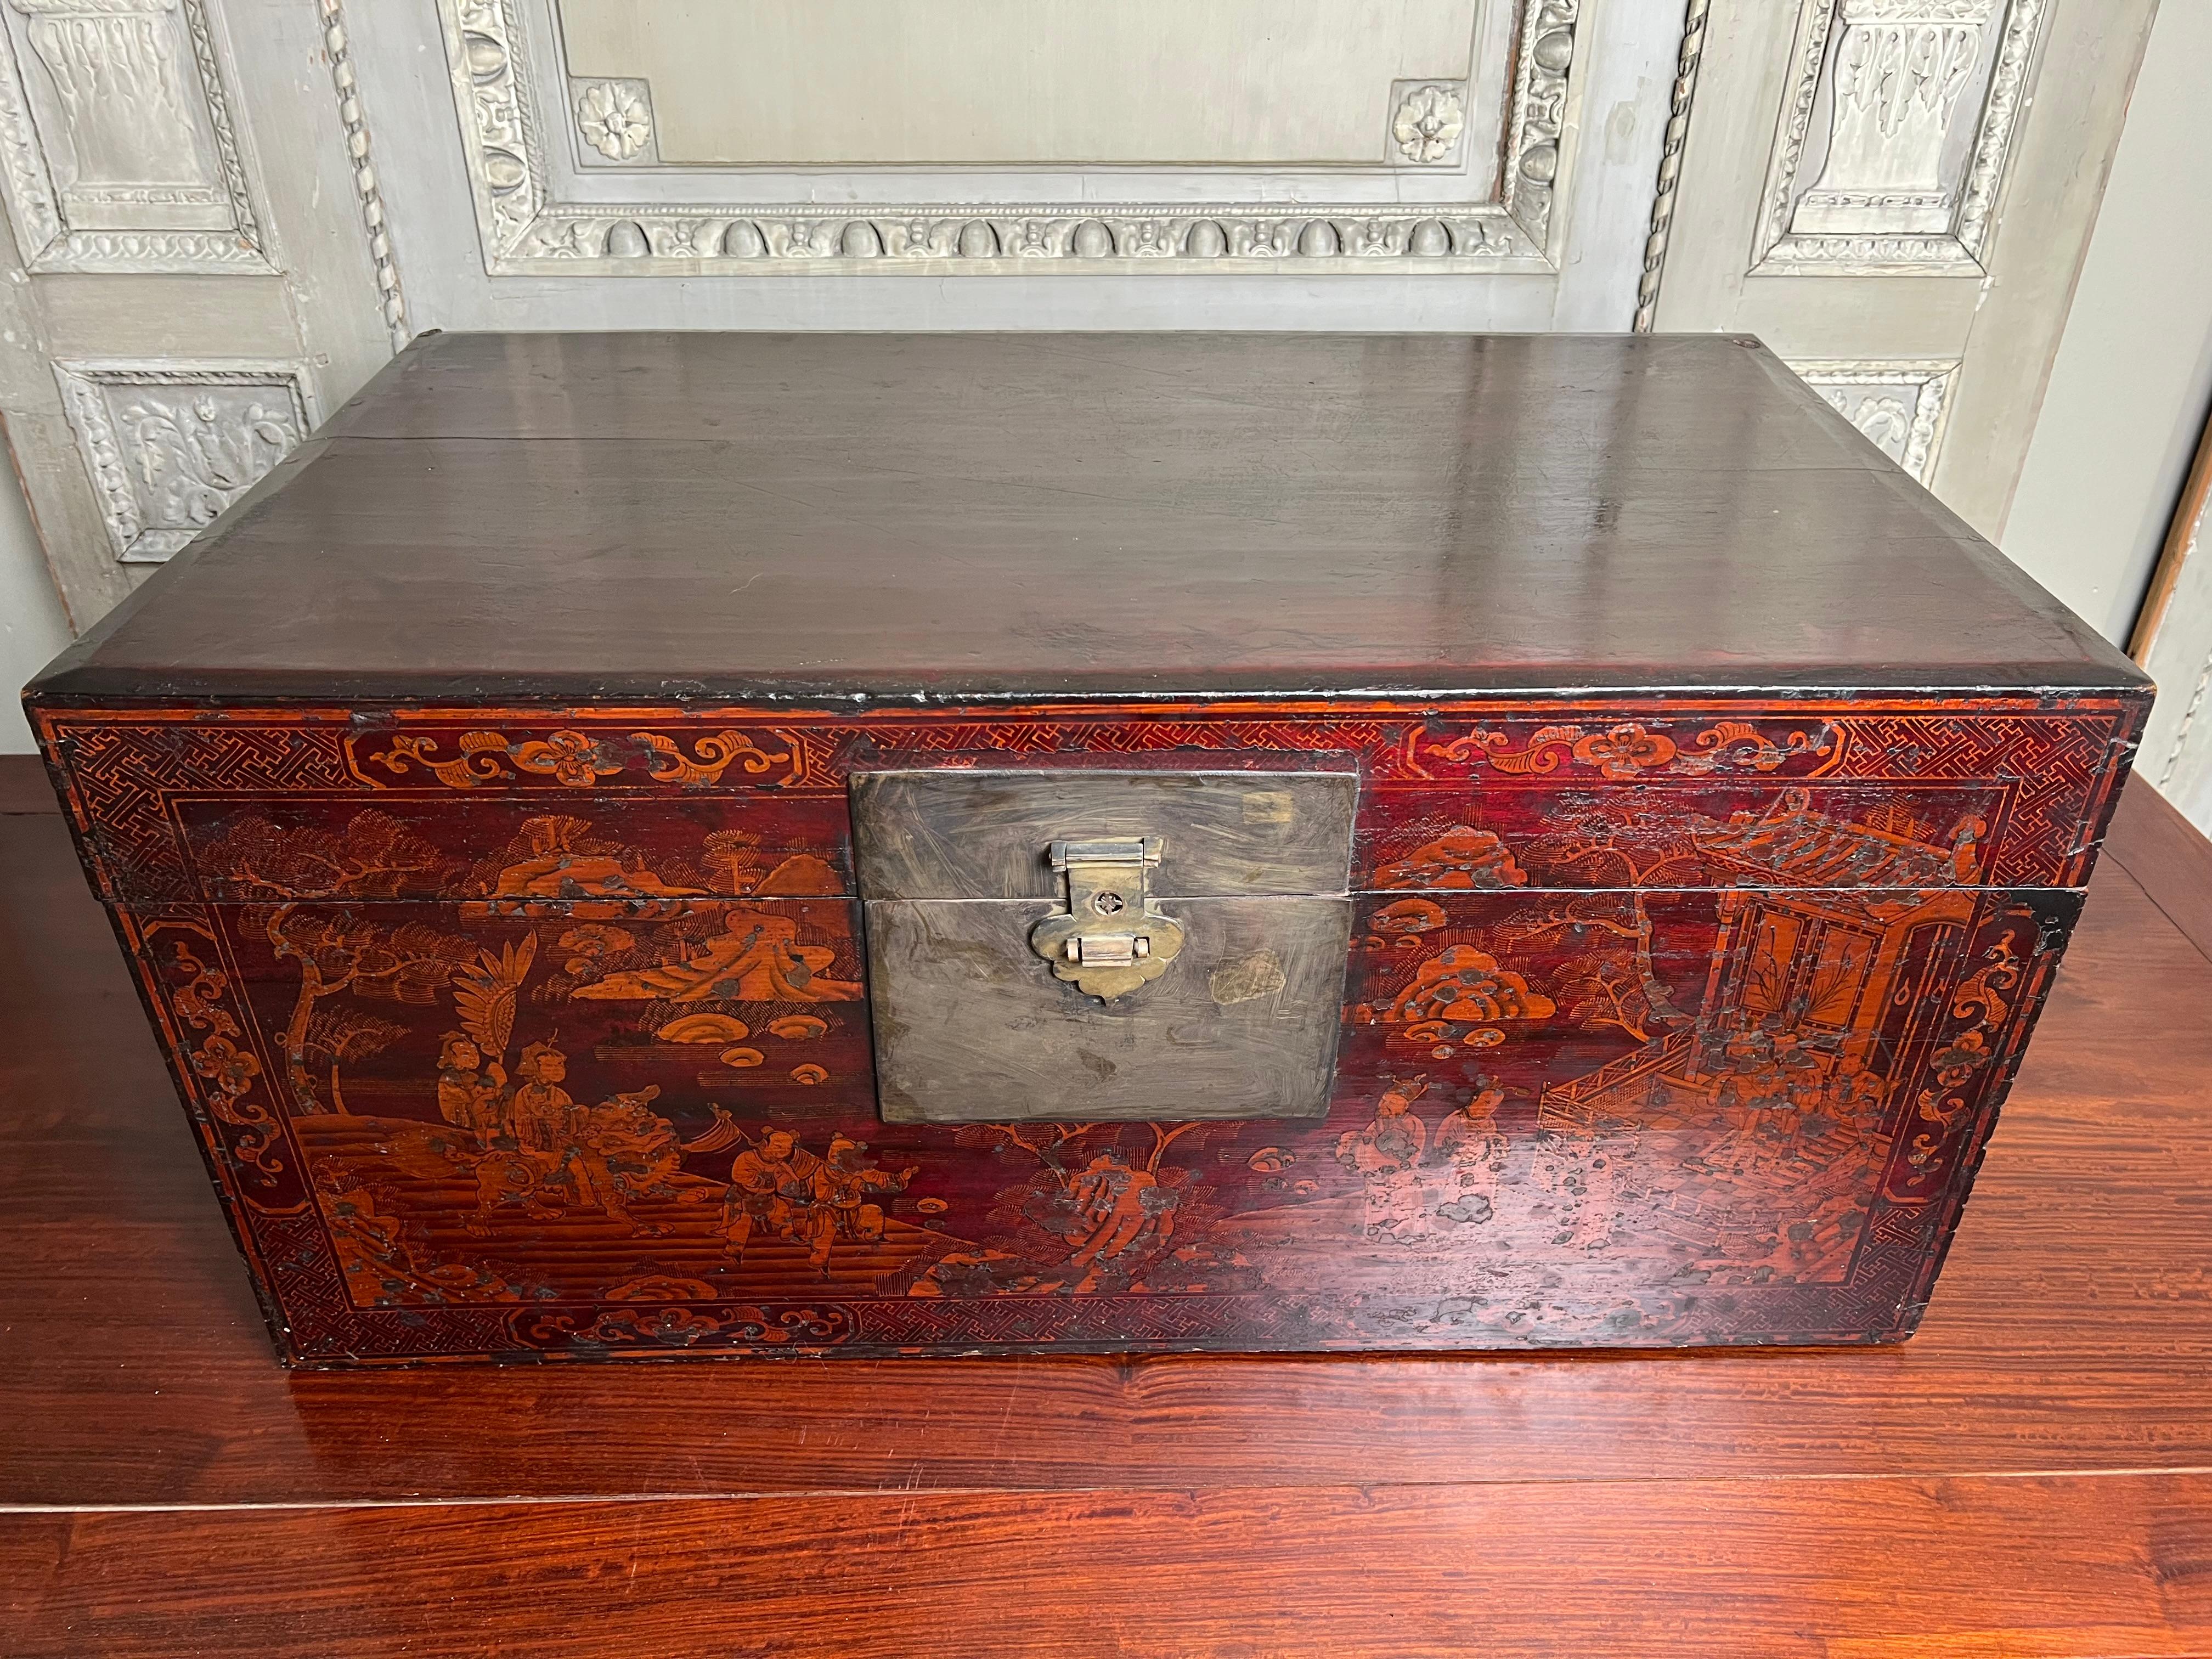 A 19th century Chinese red lacquered trunk with gilt decoration depicting a court scene with mountains and foliage.  This highly decorative trunk is very functional and could be used as a coffee table, under a console or placed on a stand for a side